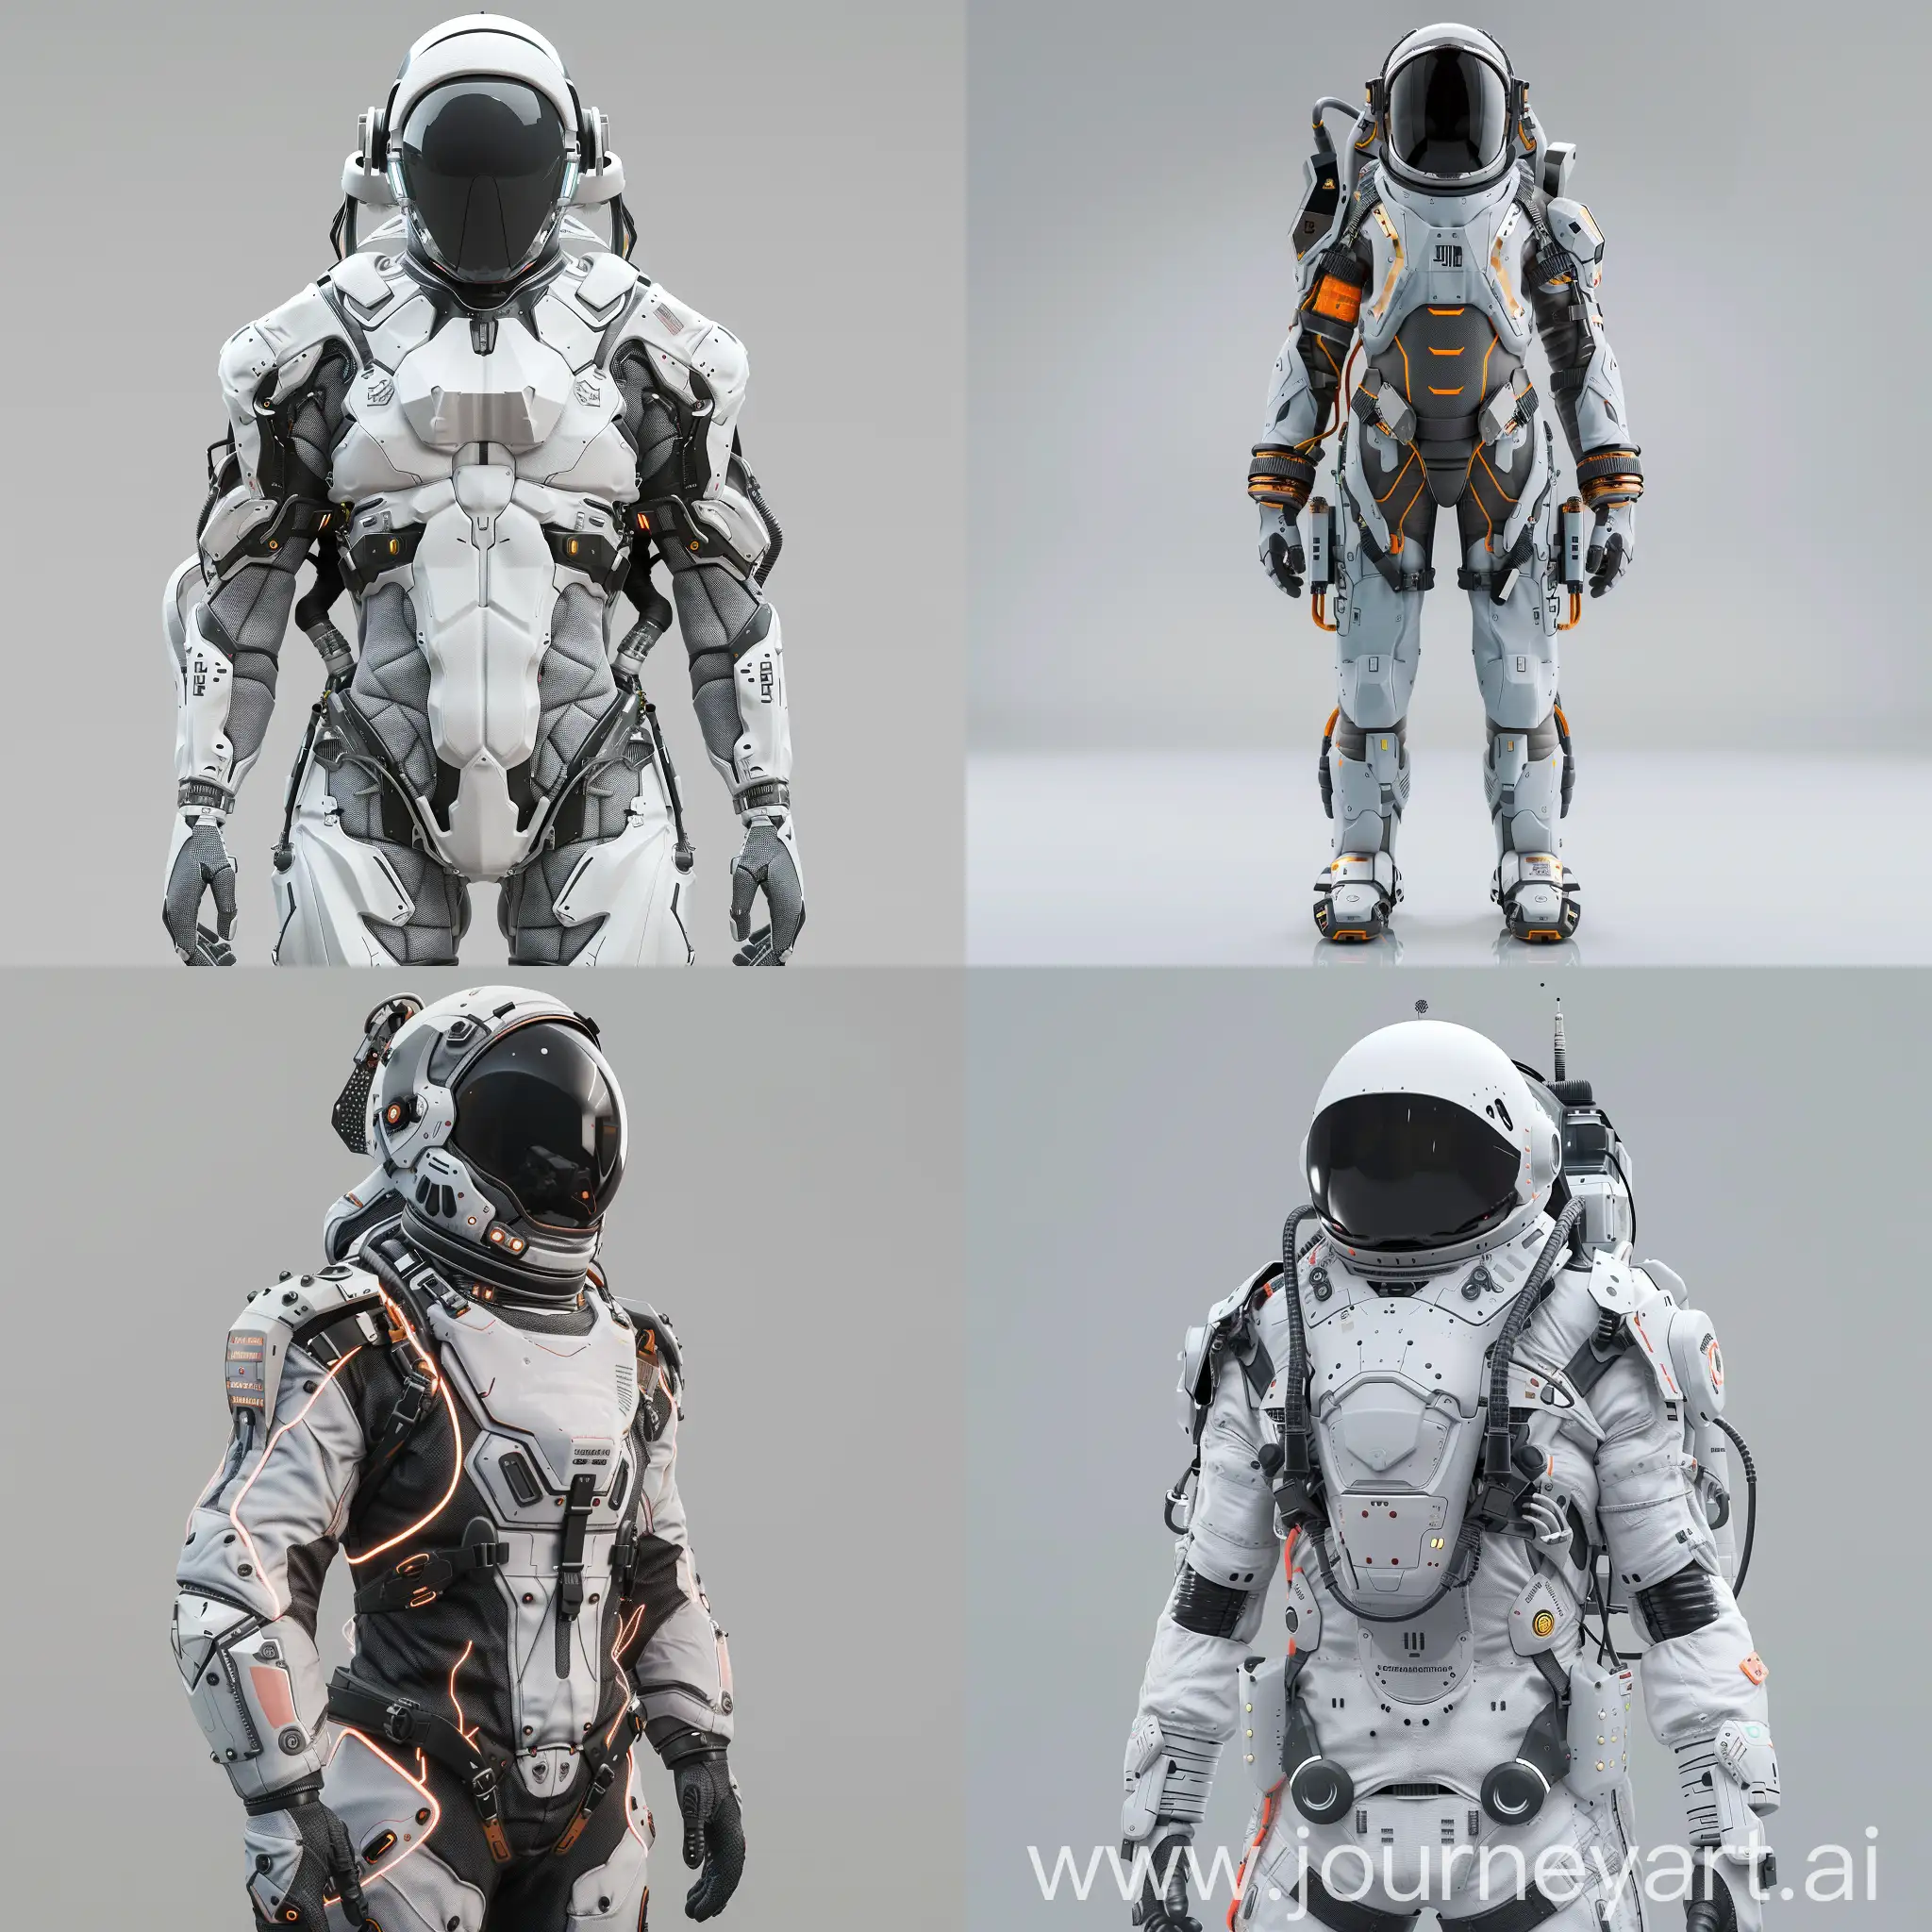 Futuristic-Space-Suit-with-Biomechanical-Enhancements-and-Advanced-Life-Support-Systems